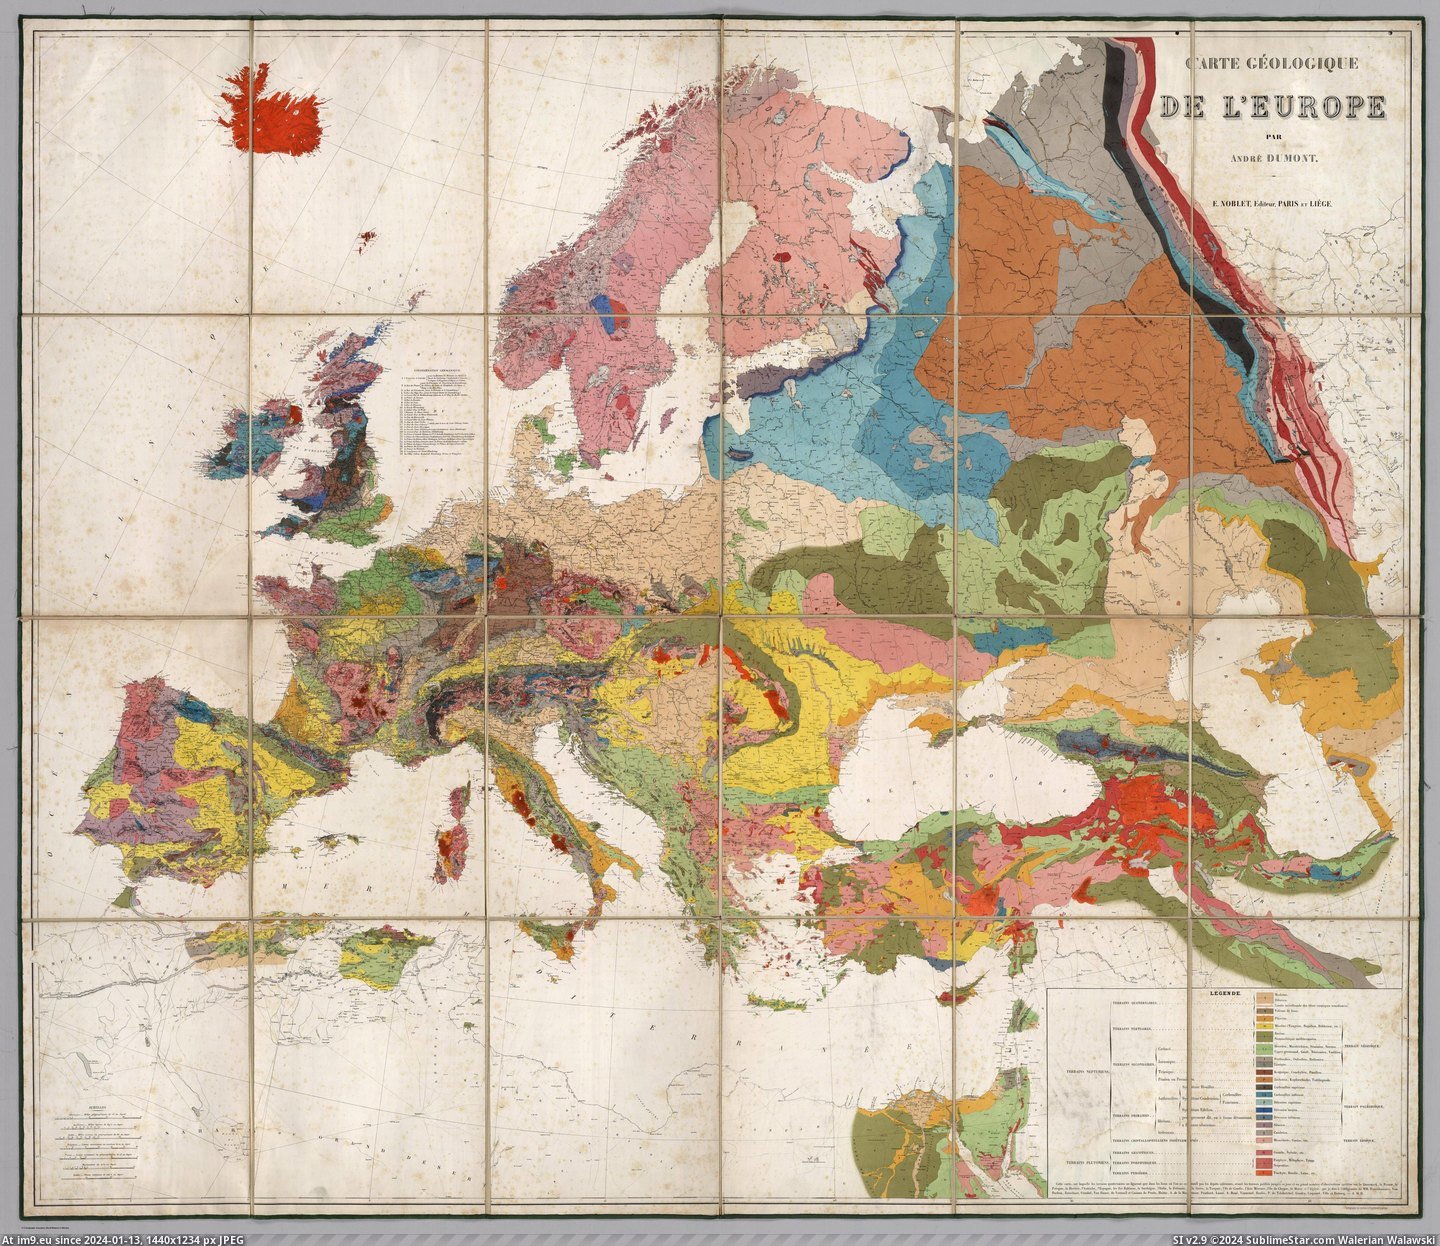 #Map #Europe #Dumont #Andre #Geological [Mapporn] Geological map of Europe, made by Andre Dumont in 1875 [5132x4409] Pic. (Image of album My r/MAPS favs))